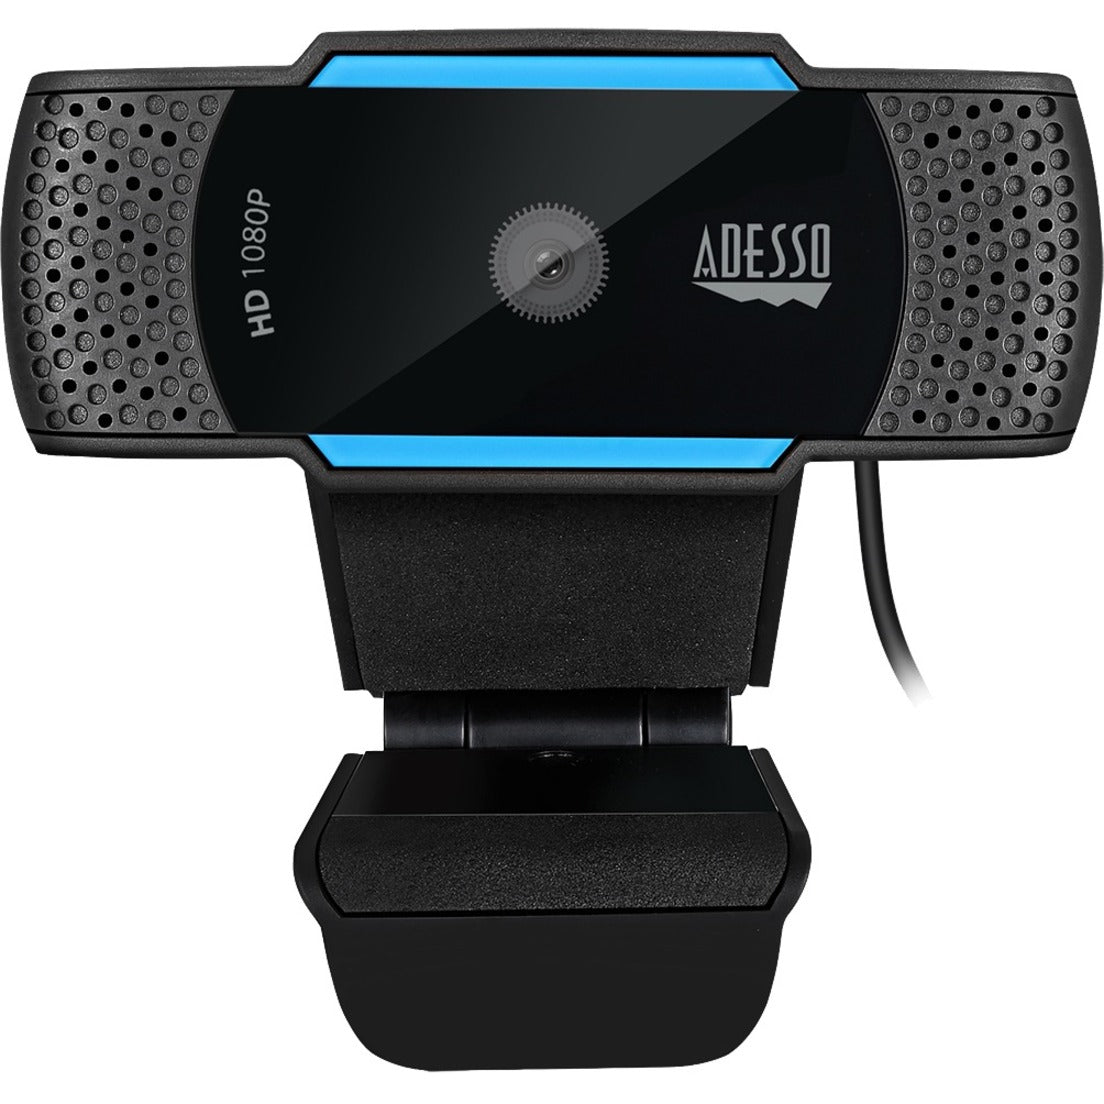 Adesso CYBERTRACKH5 1080P HD H.264 Auto Focus USB Webcam with Built-in Dual Microphone 2.1 Megapixel 30 fps